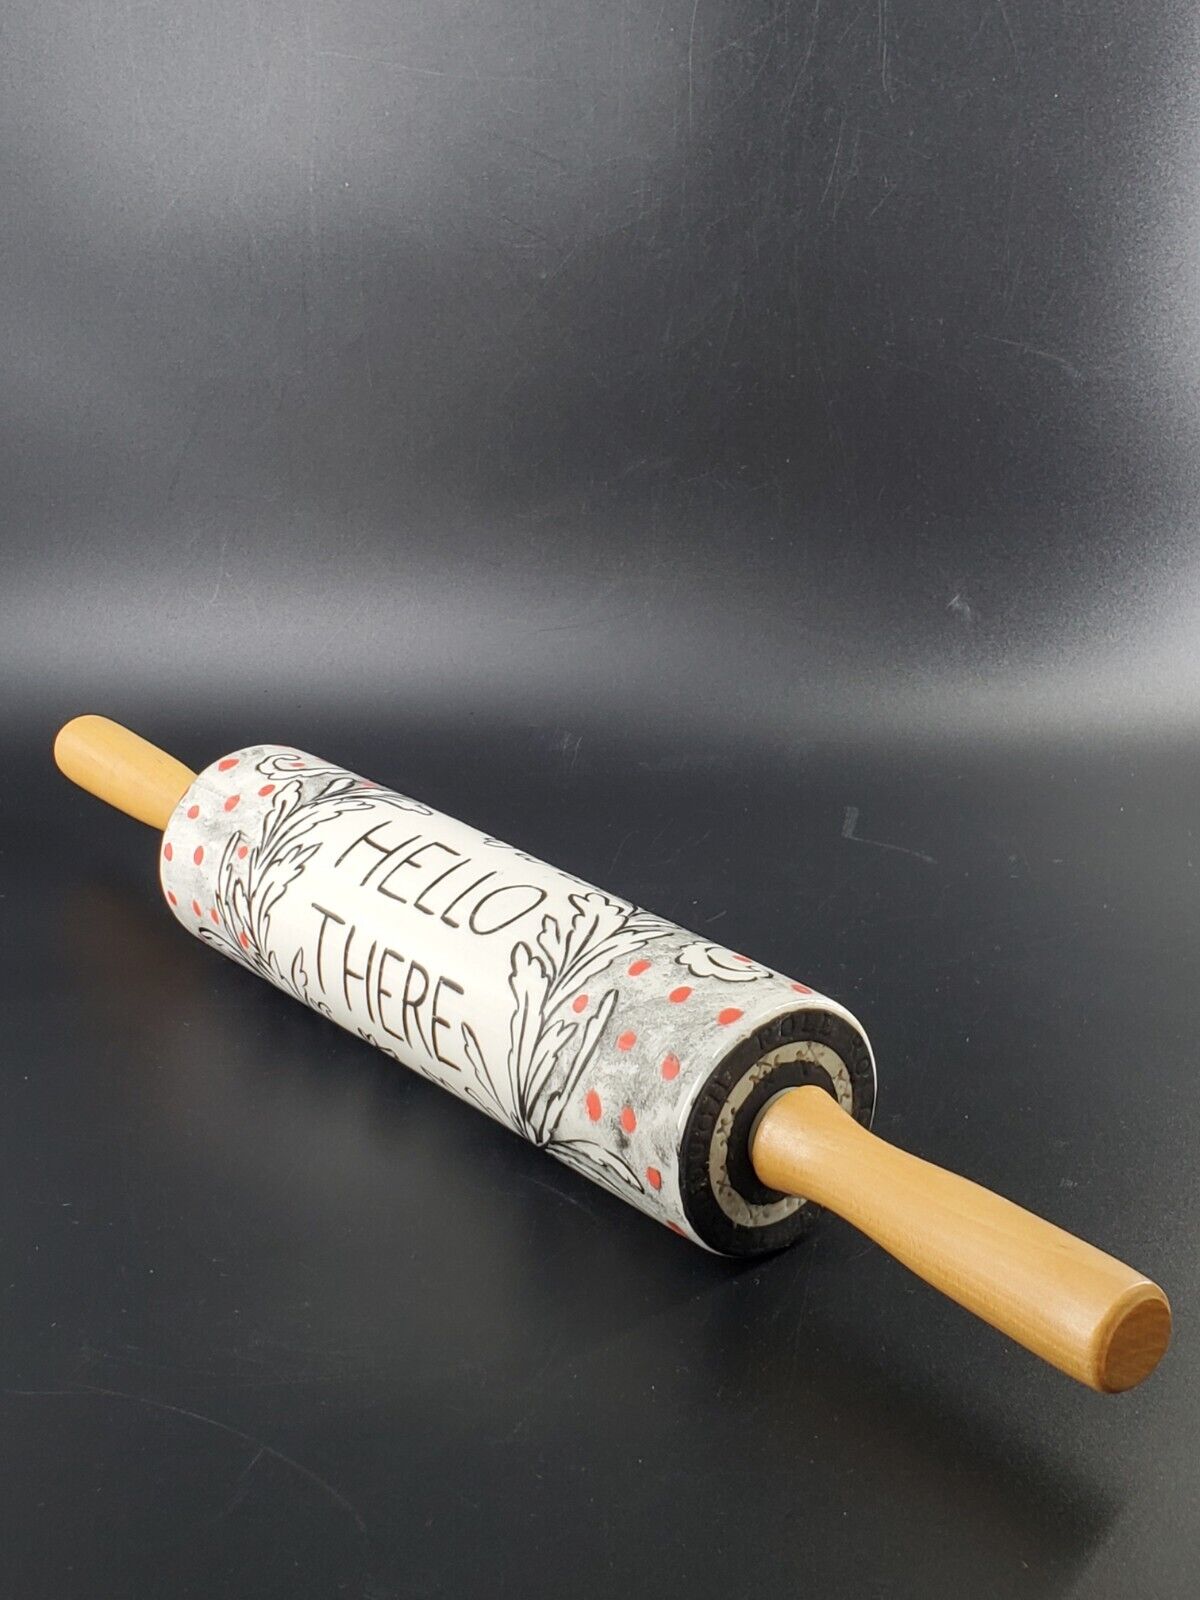 Anthropologie MOLLY HATCH *HELLO THERE* ceramic ROLLING PIN with wood handles